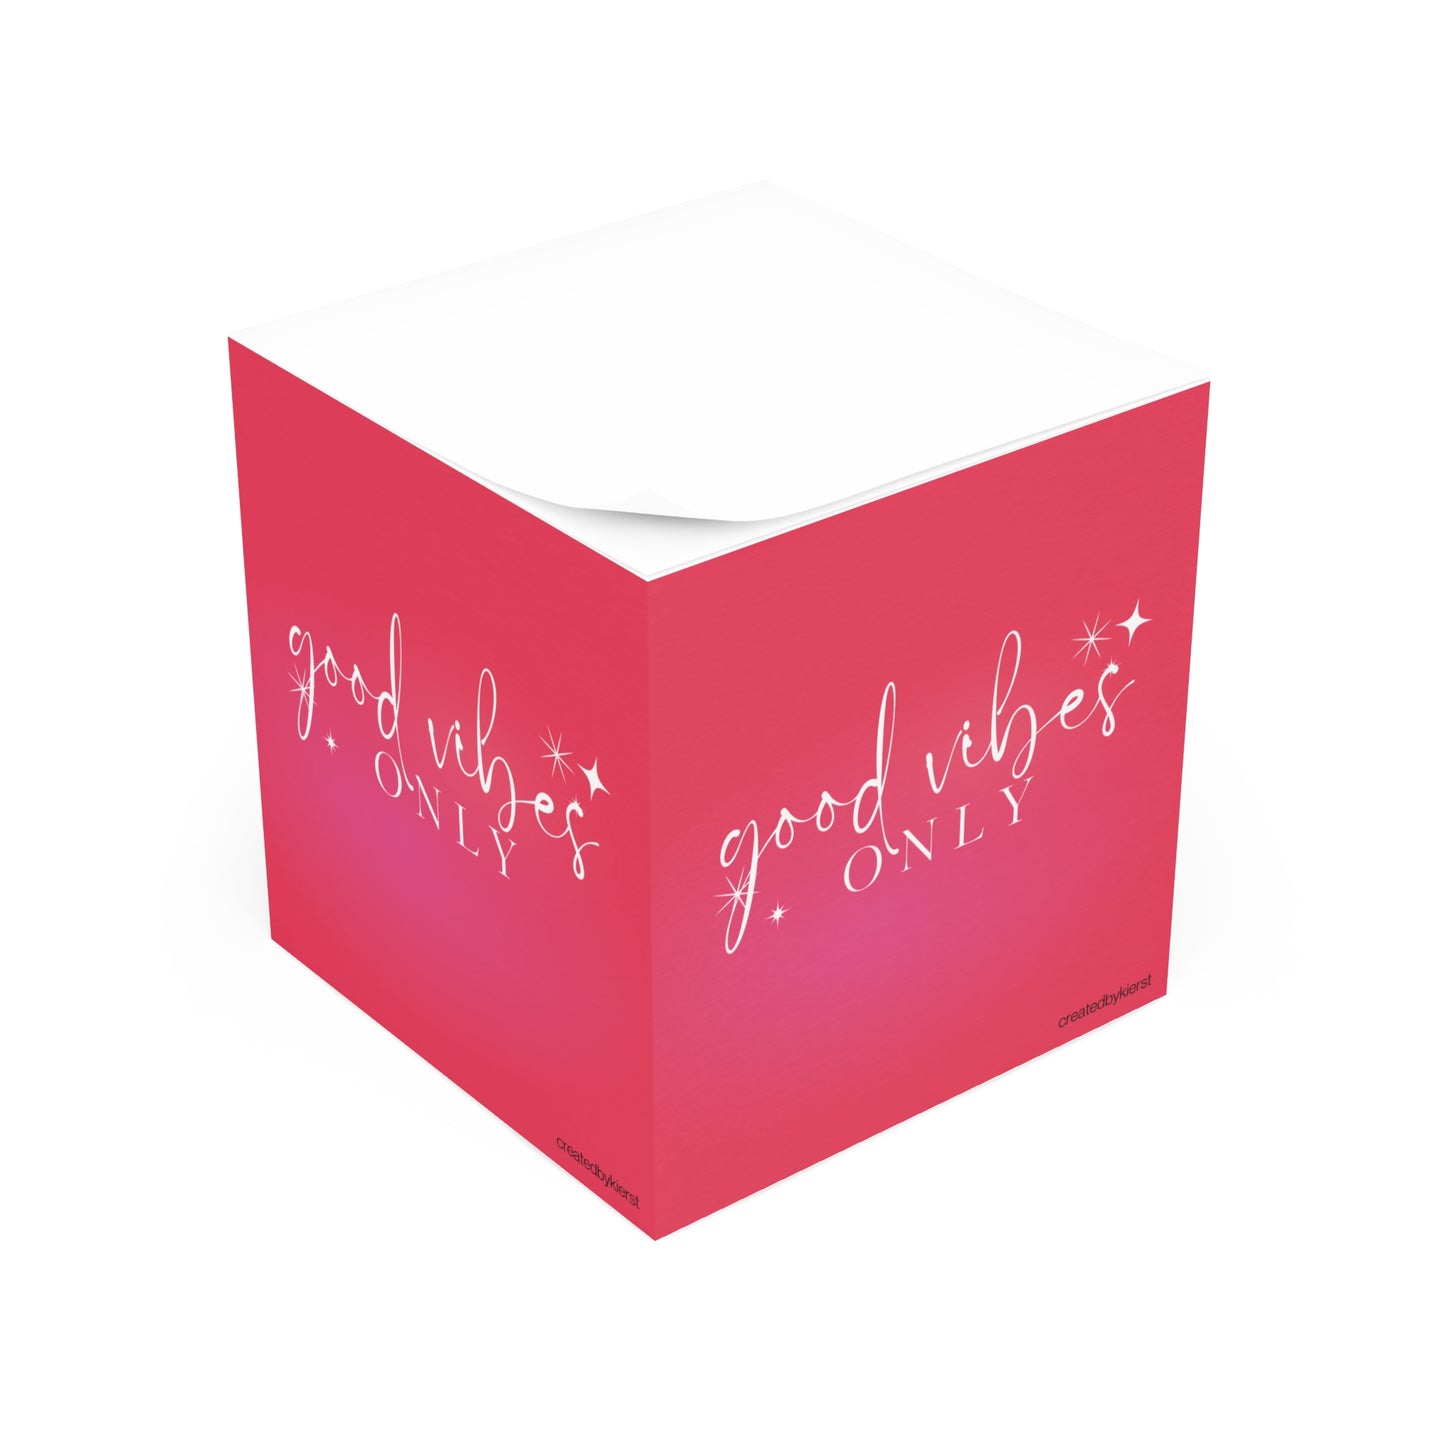 Good Vibes Only Red Note Cube